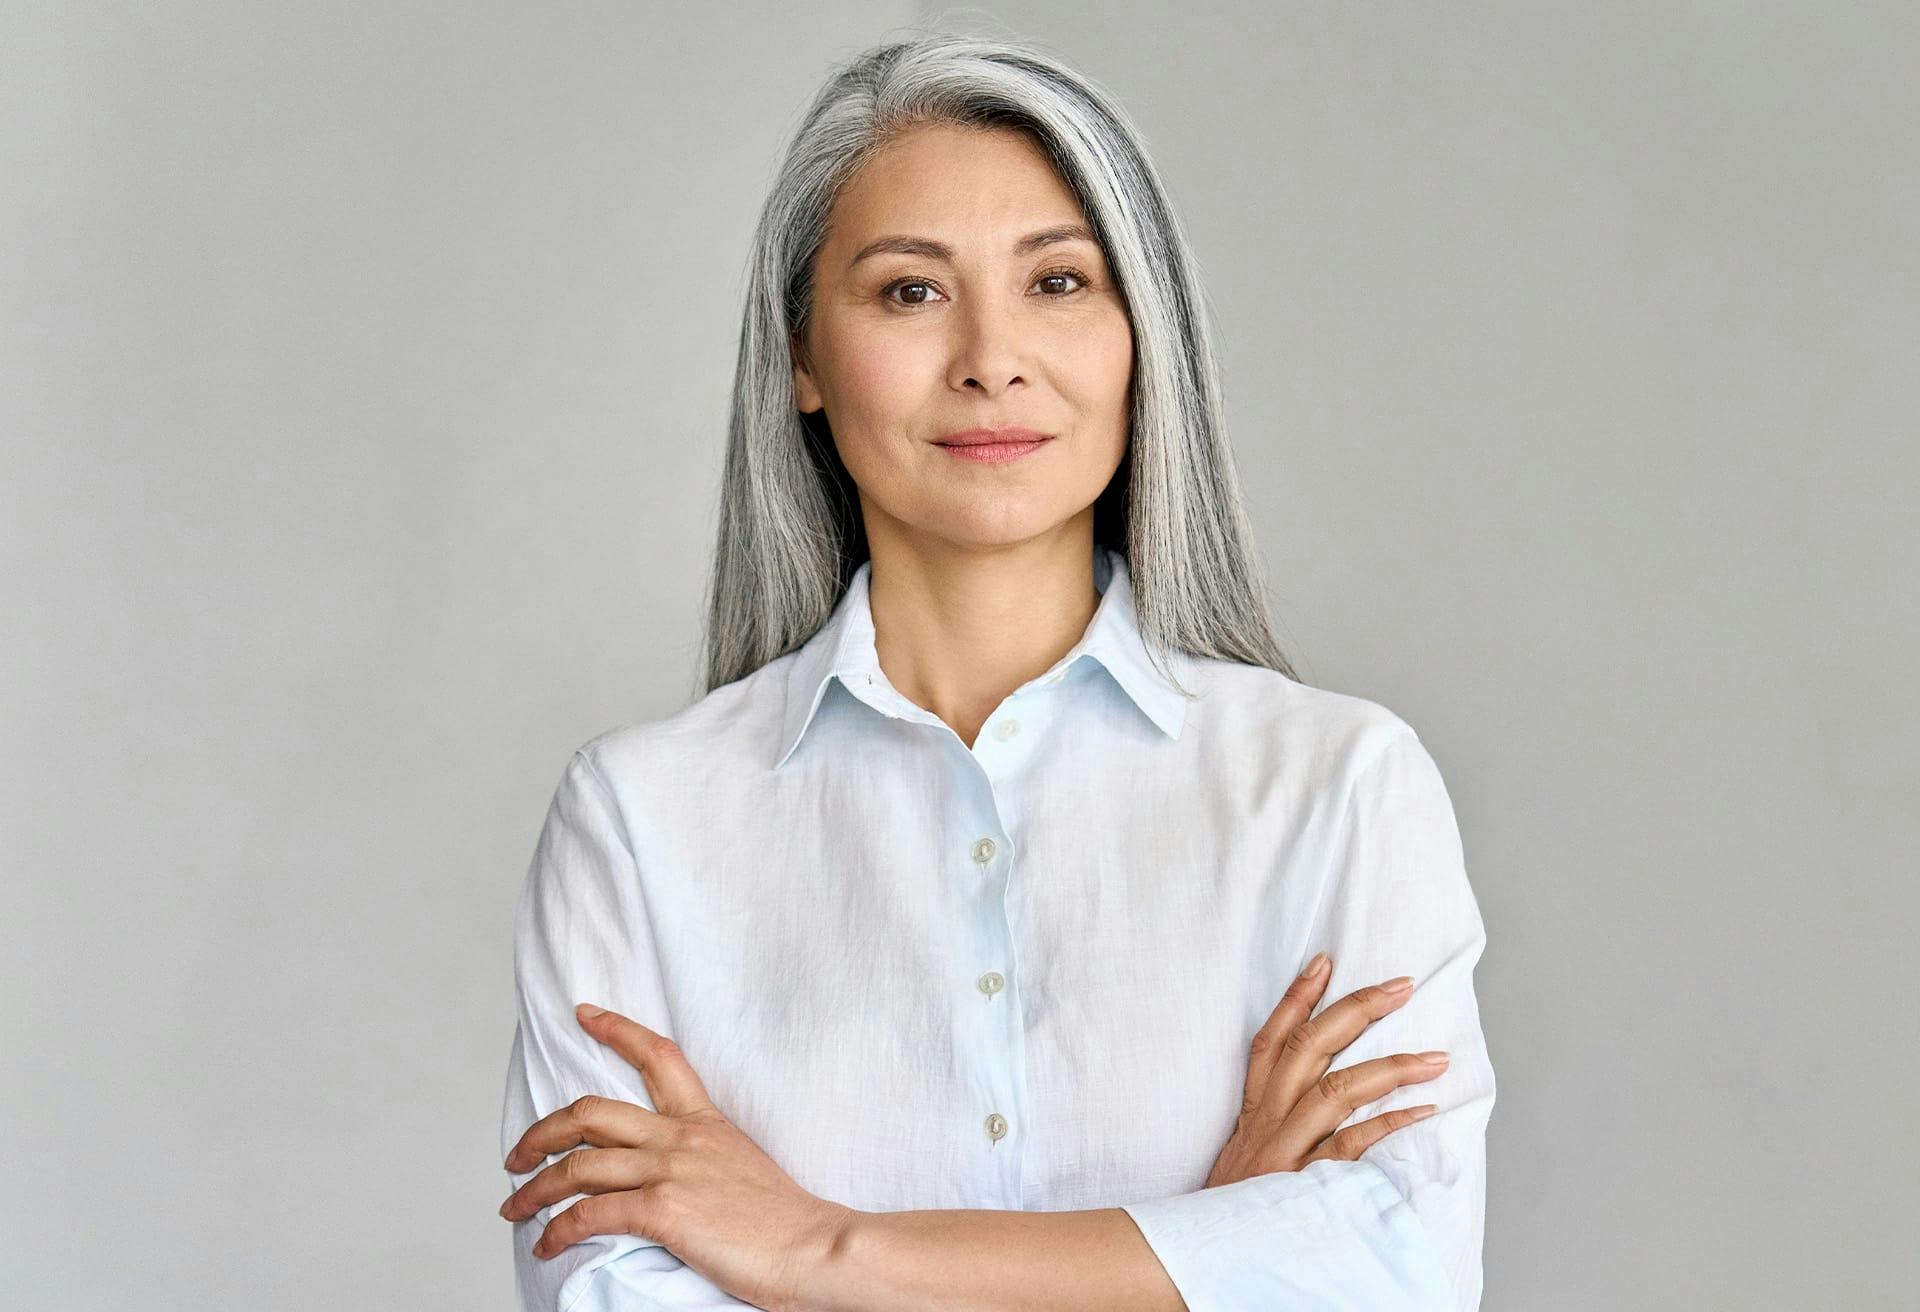 Woman with long grey hair wearing a long sleeve white button up shirt